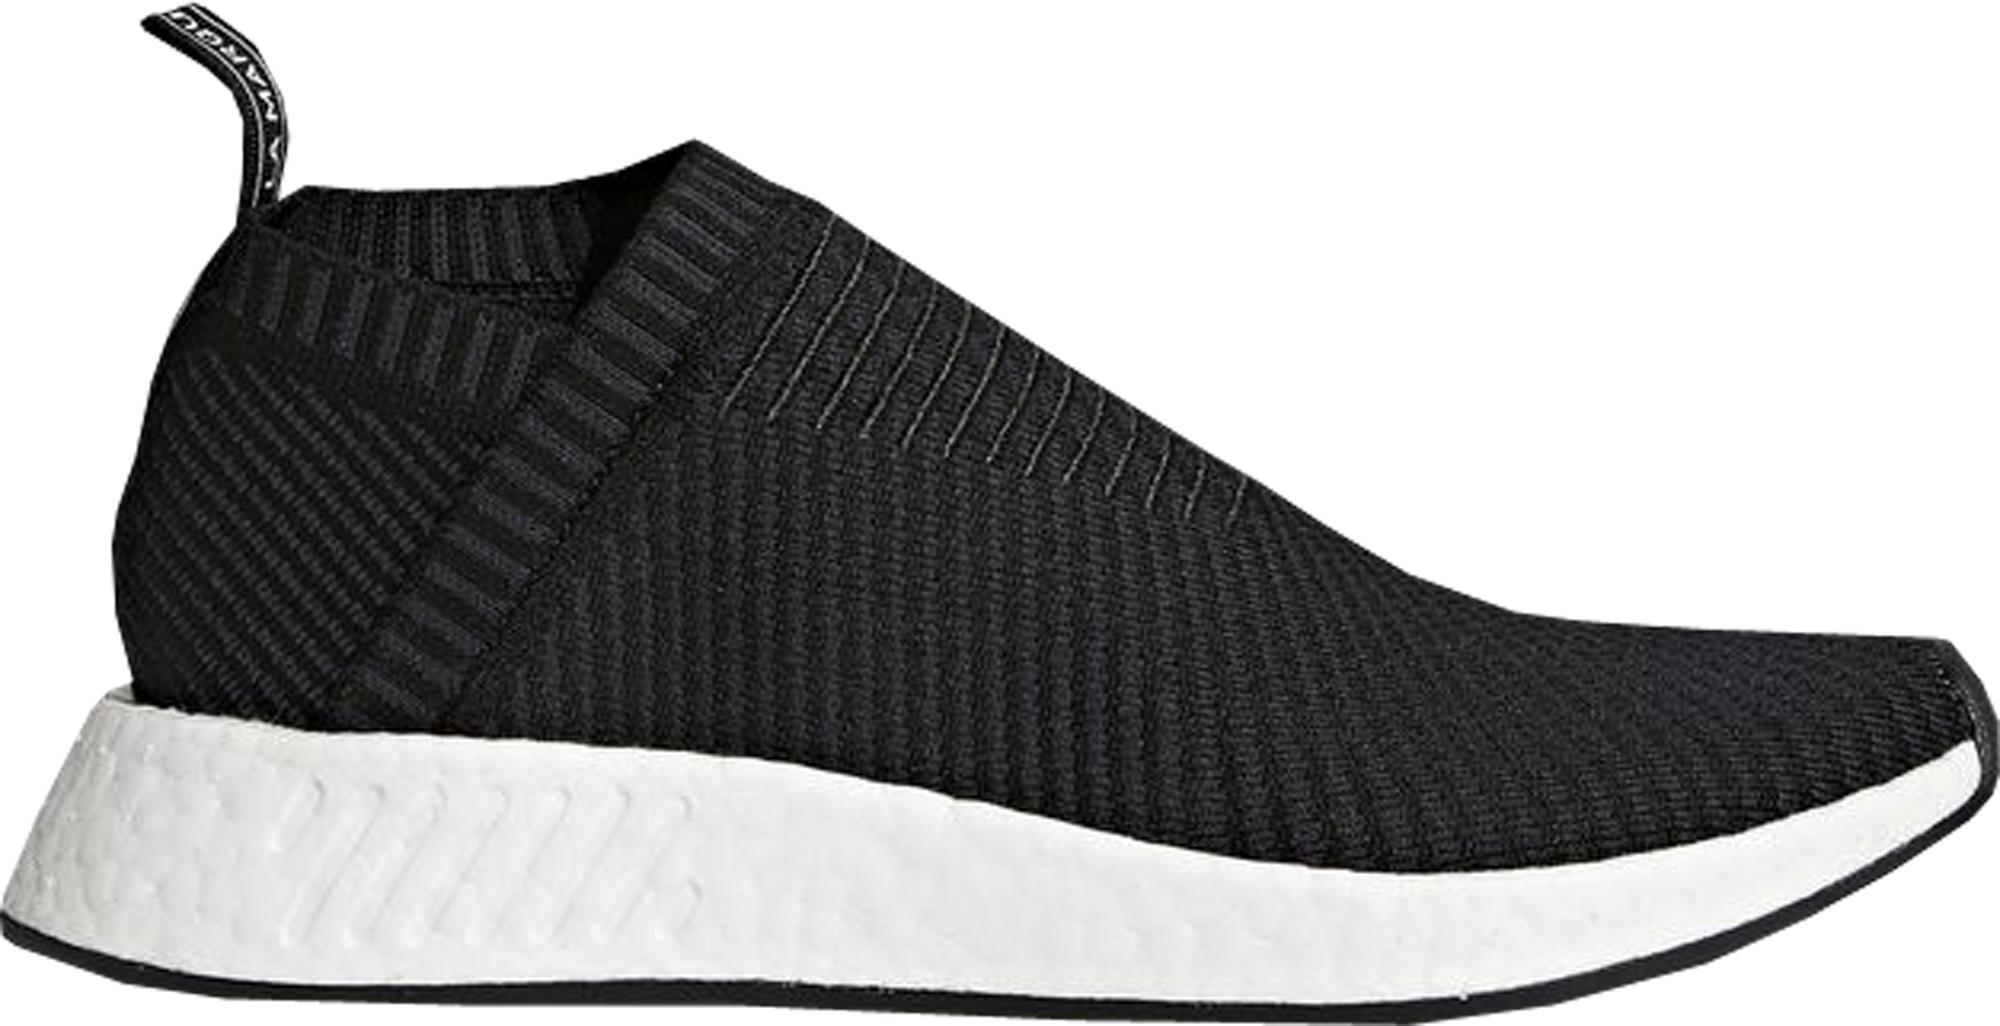 adidas NMD CS2 Core Black Red Solid